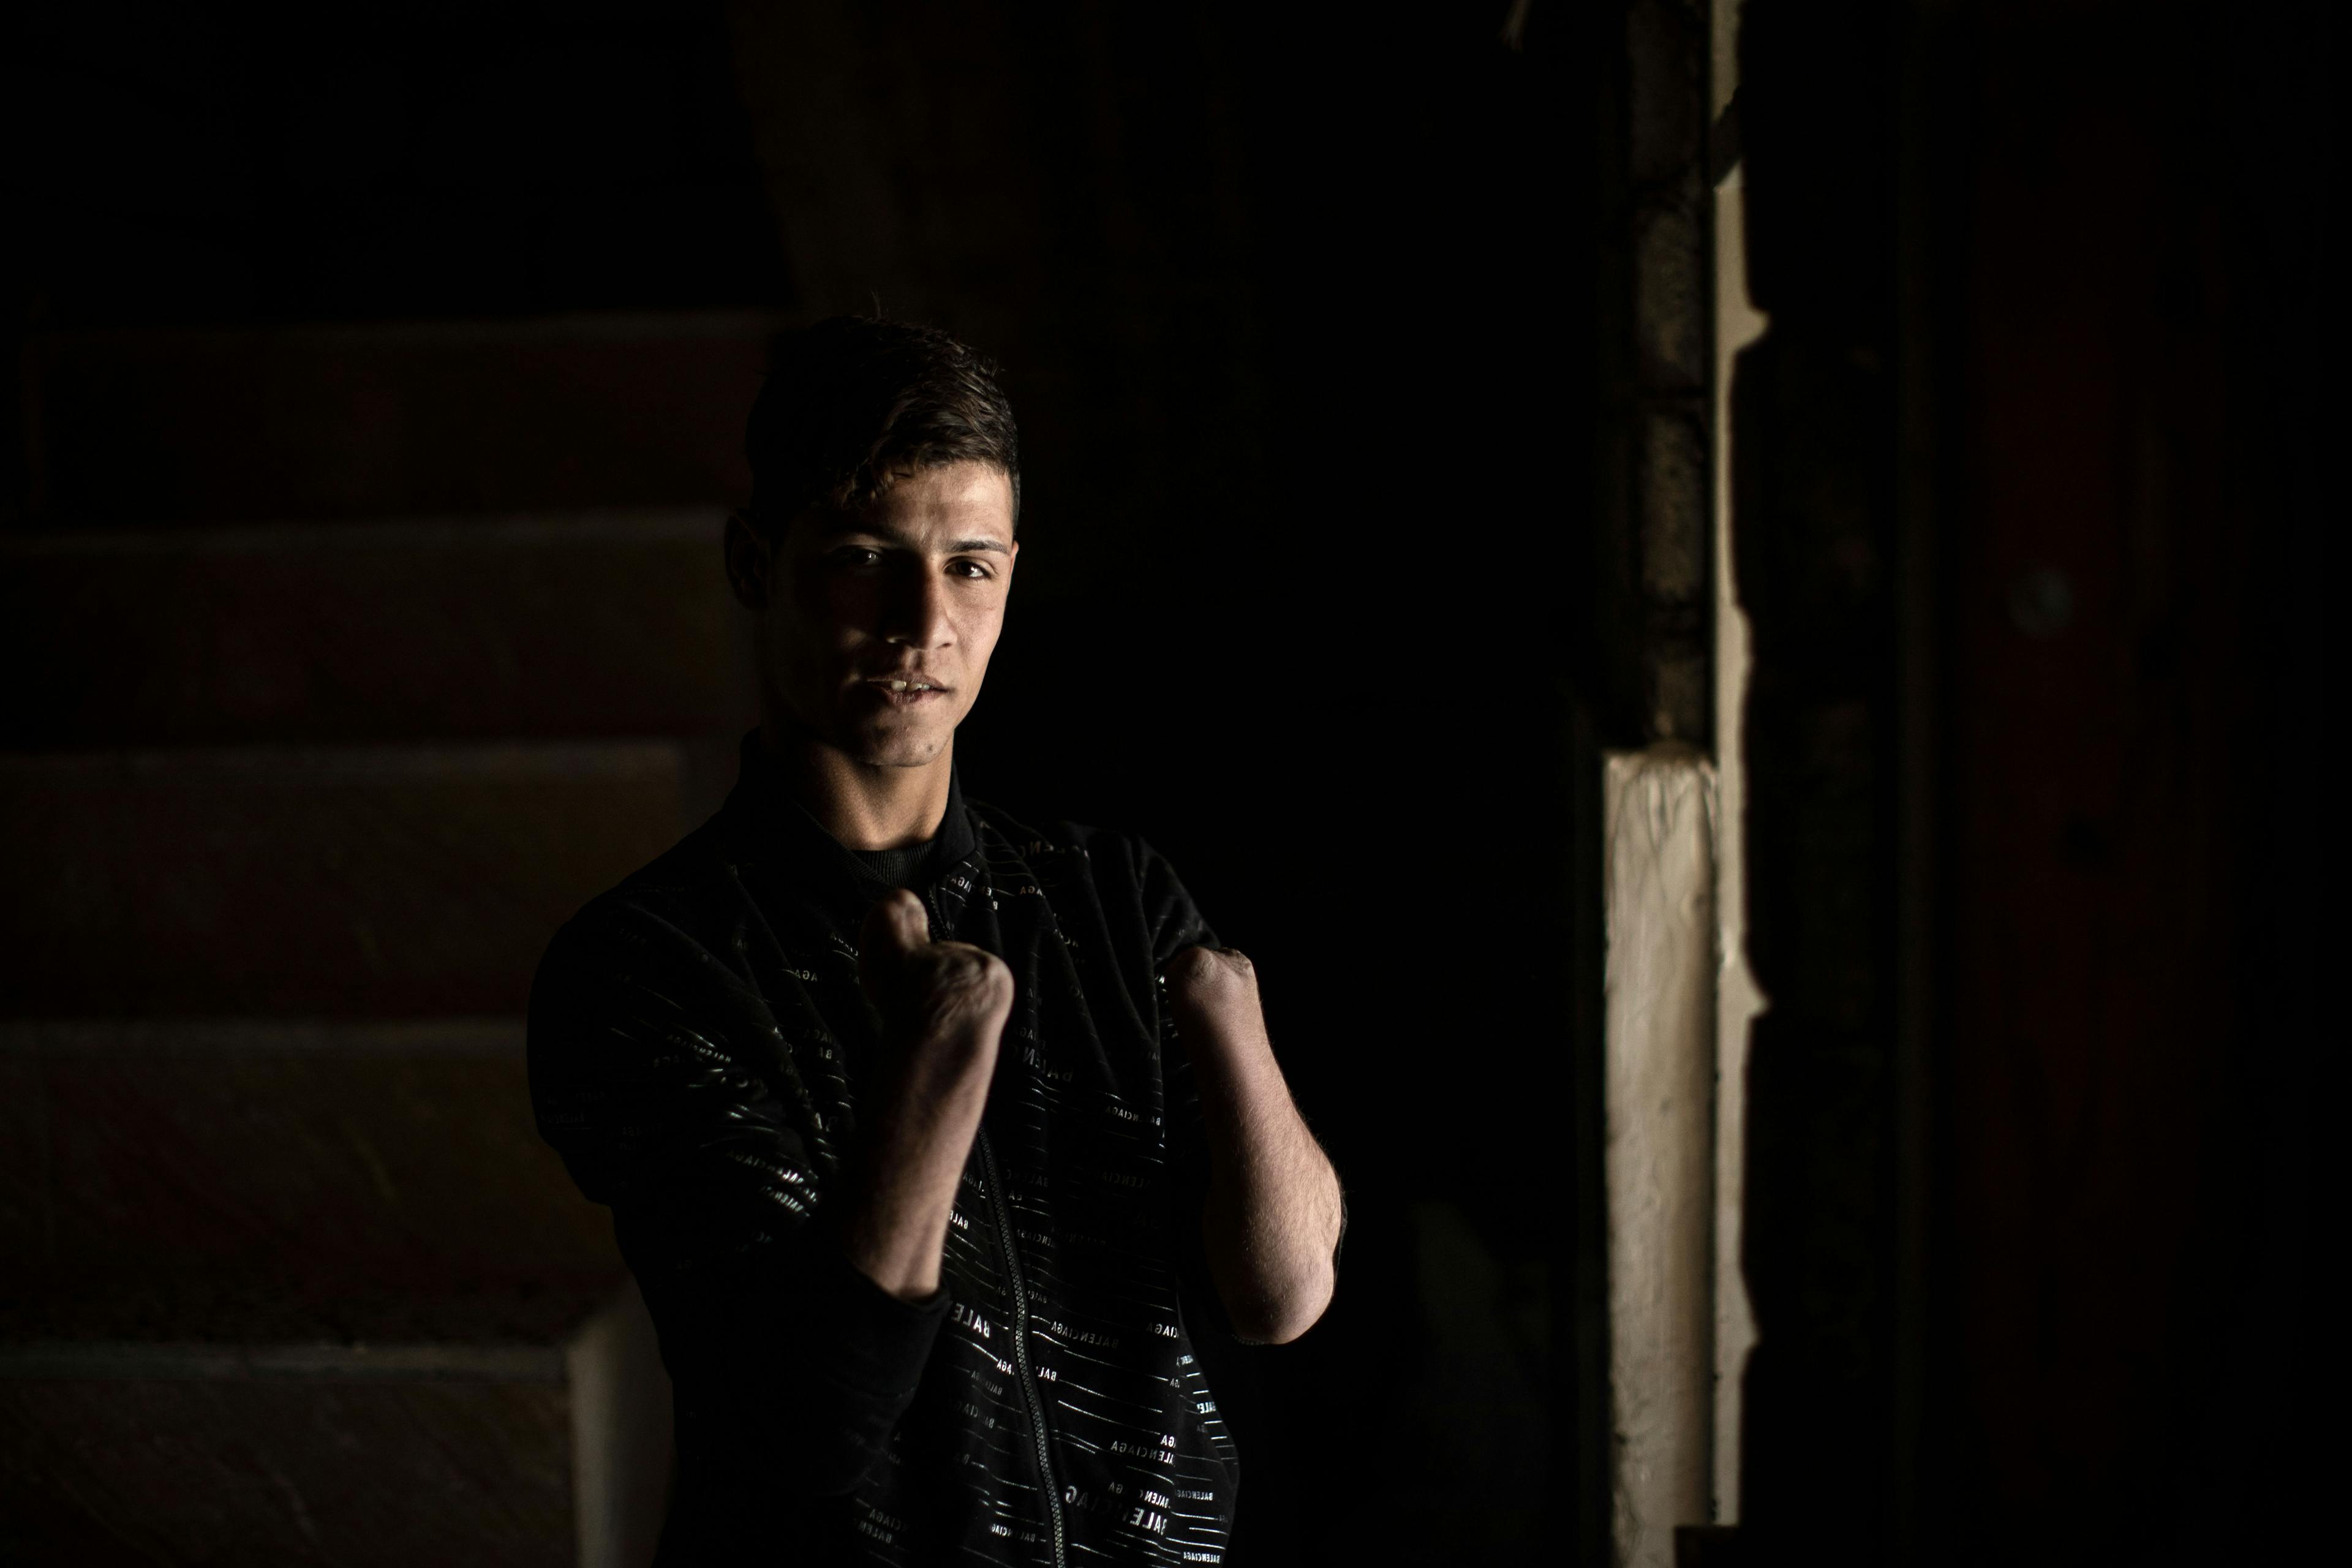 On 7 March 2022 in Iraq, a portrait of 17-year-old Ali, made inside his home in Mesherfa, on the outskirts of Mosul. Ali lost both hands hands during a shelling in West Mosul in 2017, trapped in the midst of combat between ISIS and liberating forces.